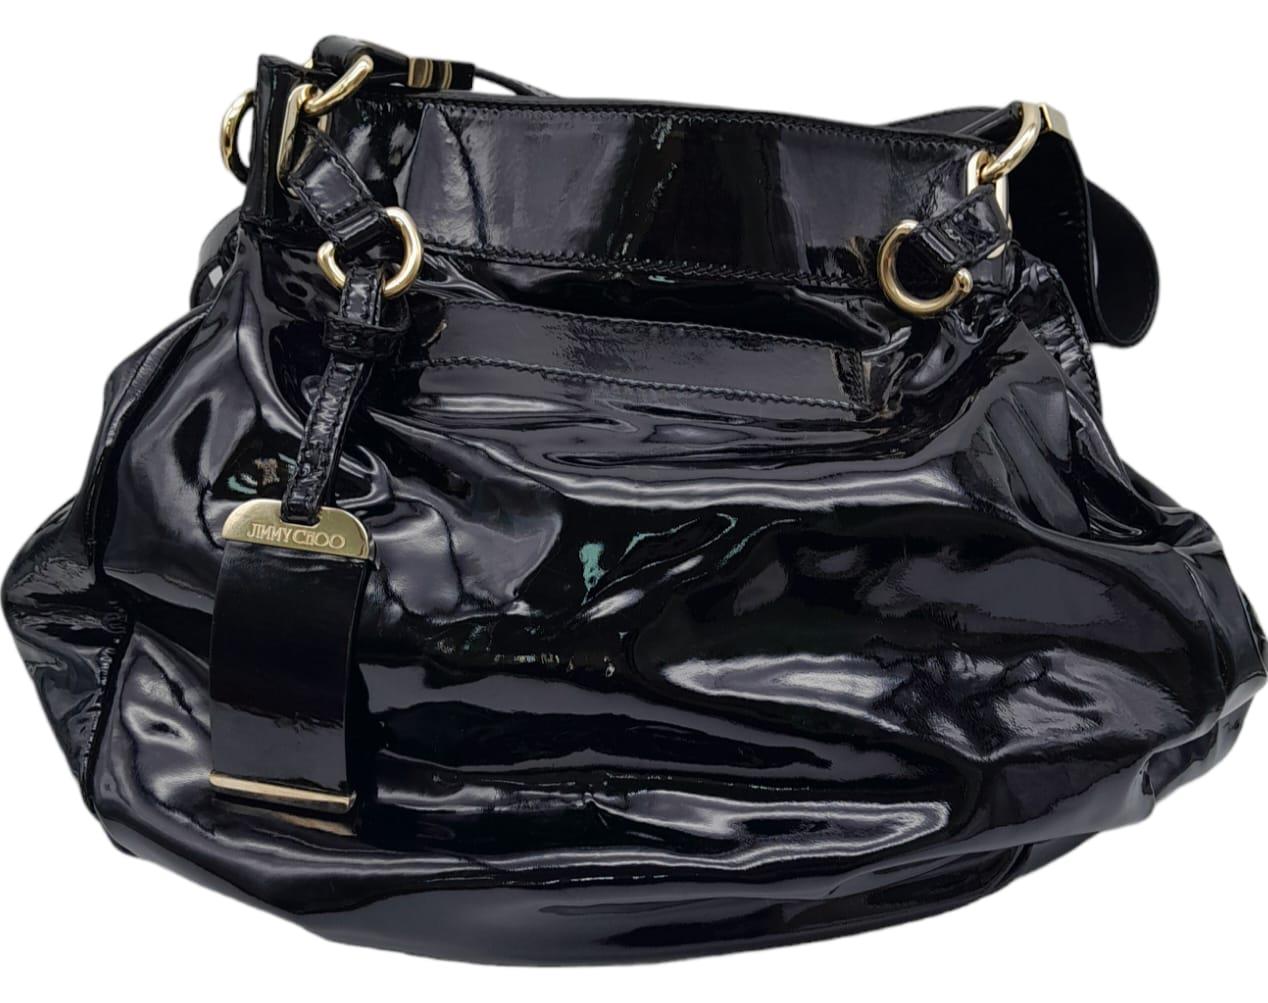 Jimmy Choo Black Patent Leather Handbag. Gorgeous feel to this handbag. Double strapped, with - Image 2 of 11